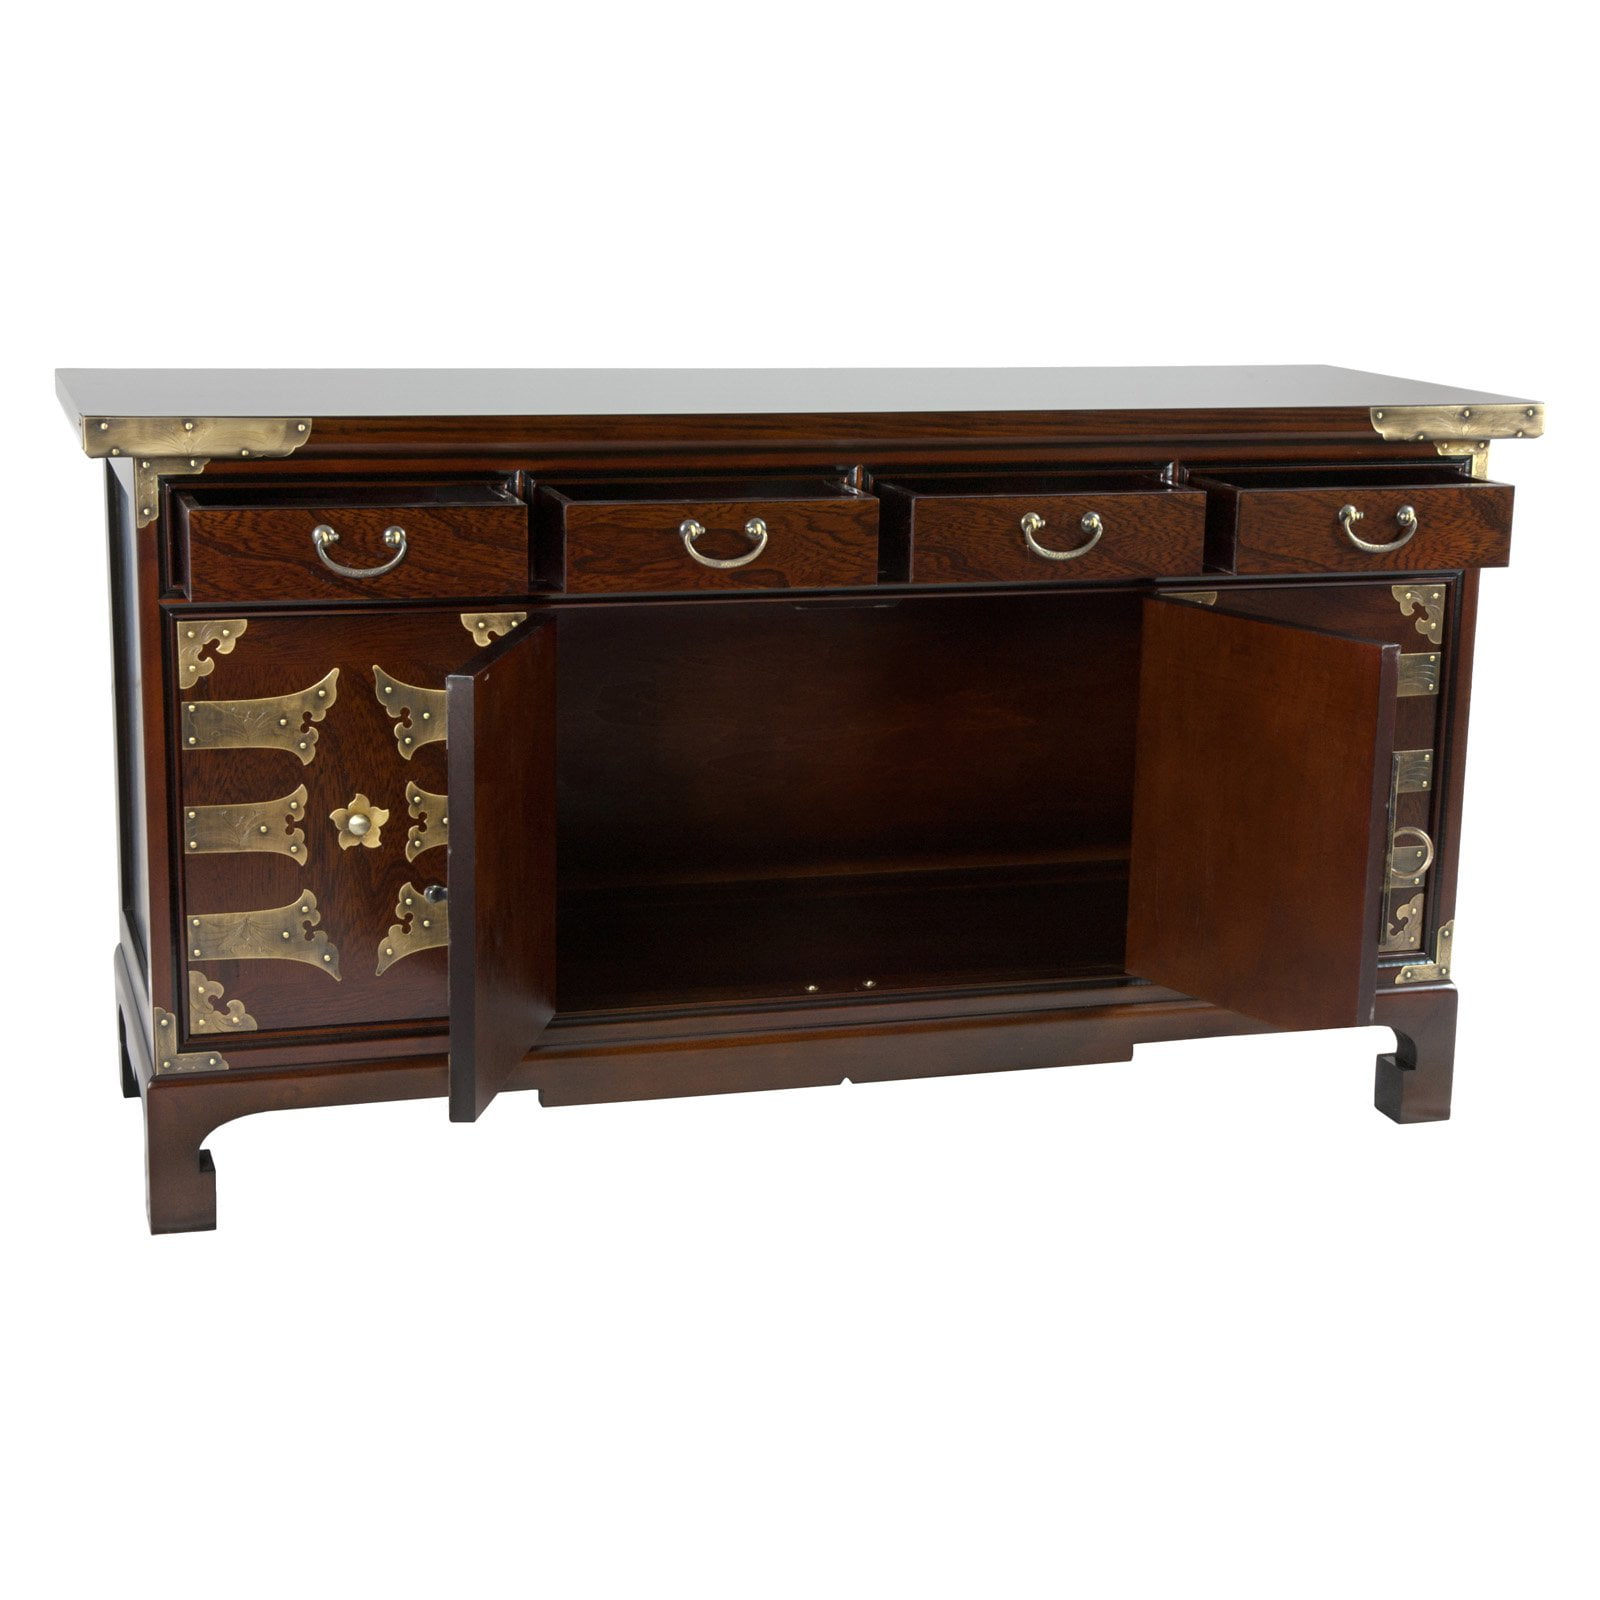 Oriental Furniture Korean Antique Style Coffee Table Low Chest